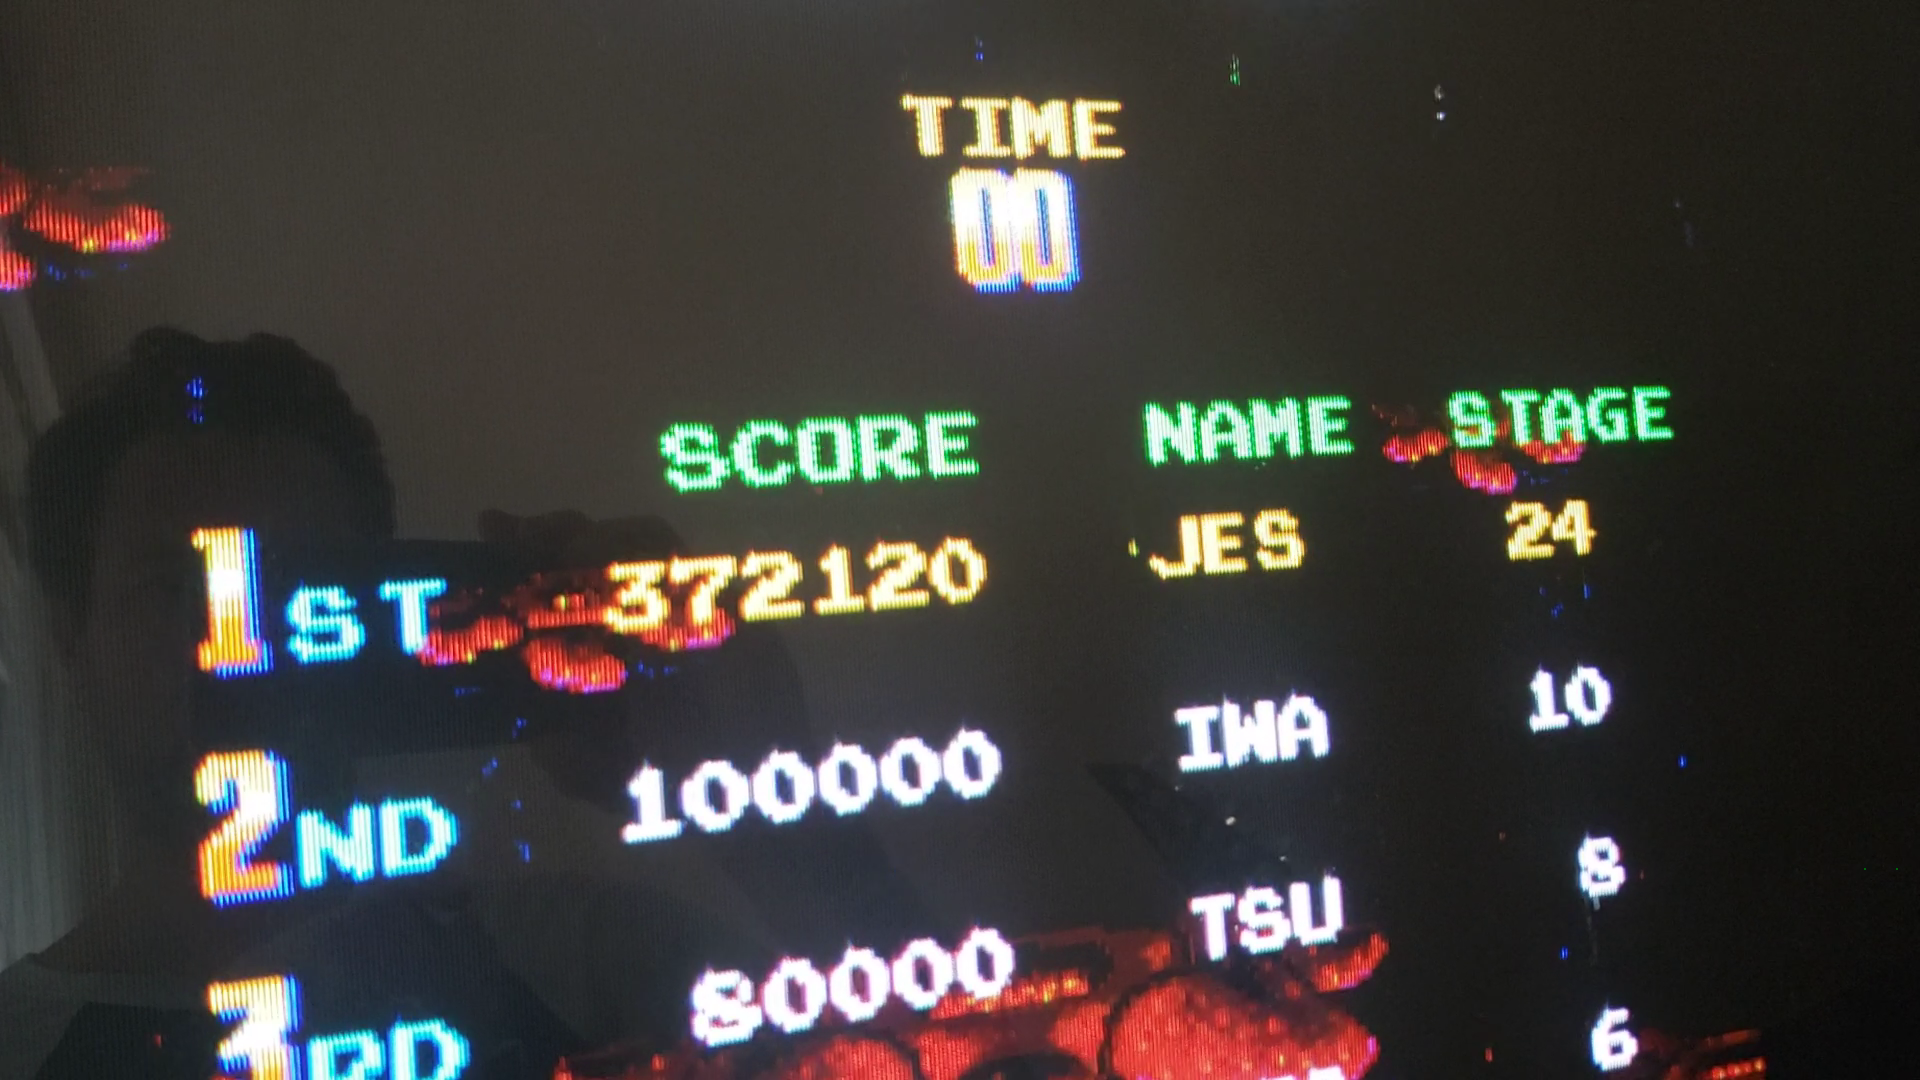 JES: Namco Classic Collection Vol. 1: Galaga Arrangement [ncv1] (Arcade Emulated / M.A.M.E.) 372,120 points on 2020-09-10 15:35:08